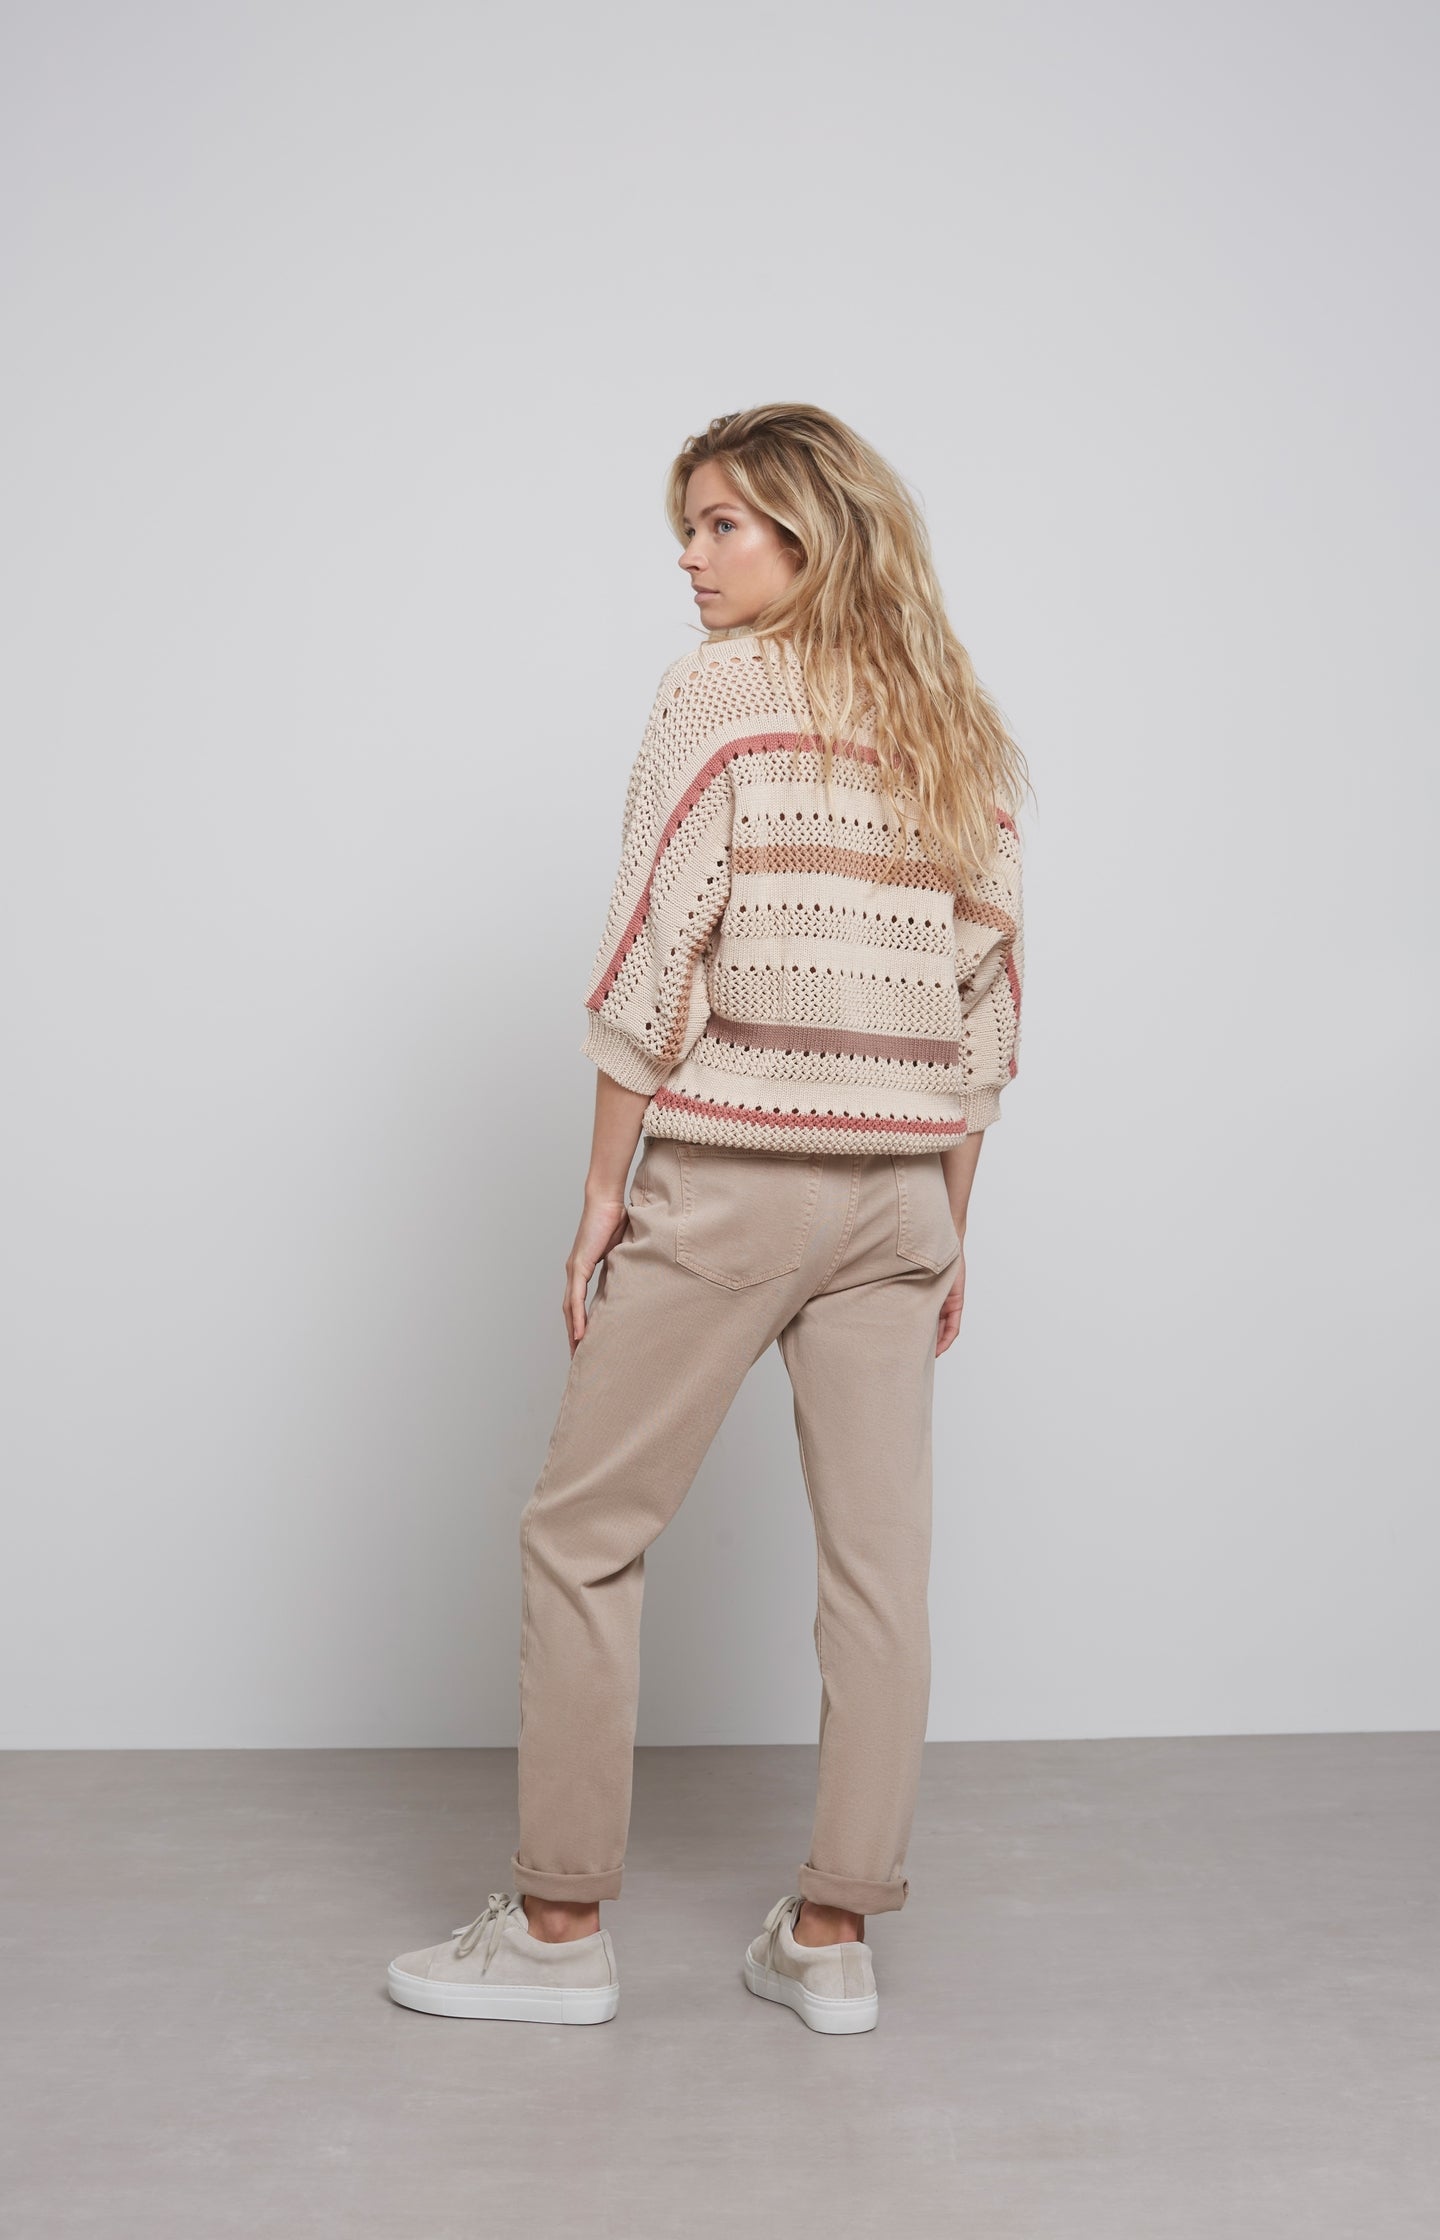 Textured sweater with stripes, round neck and 7/8 sleeves